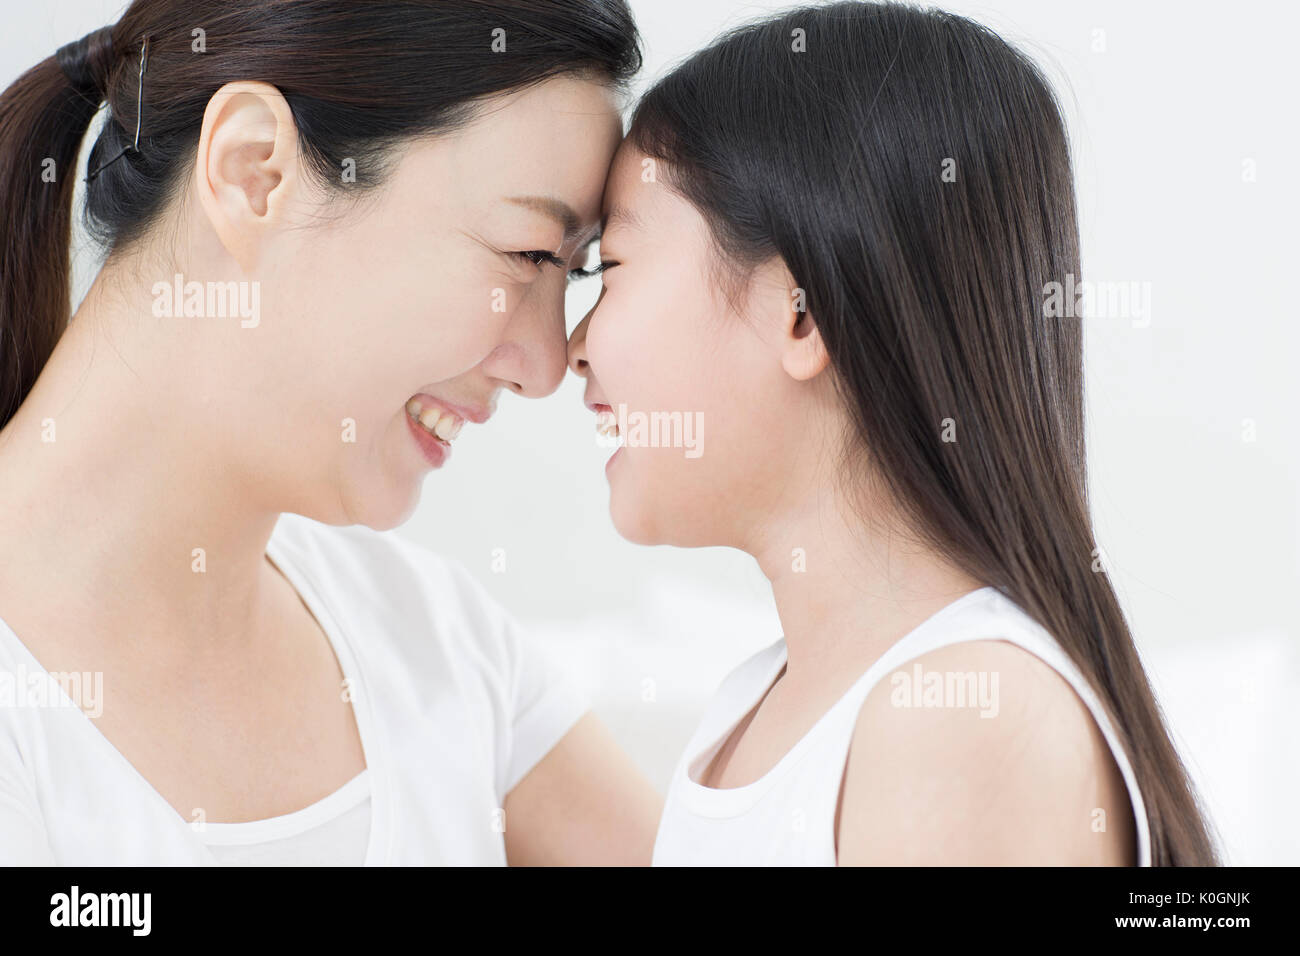 Side view portrait of smiling mother and daughter face à face Banque D'Images